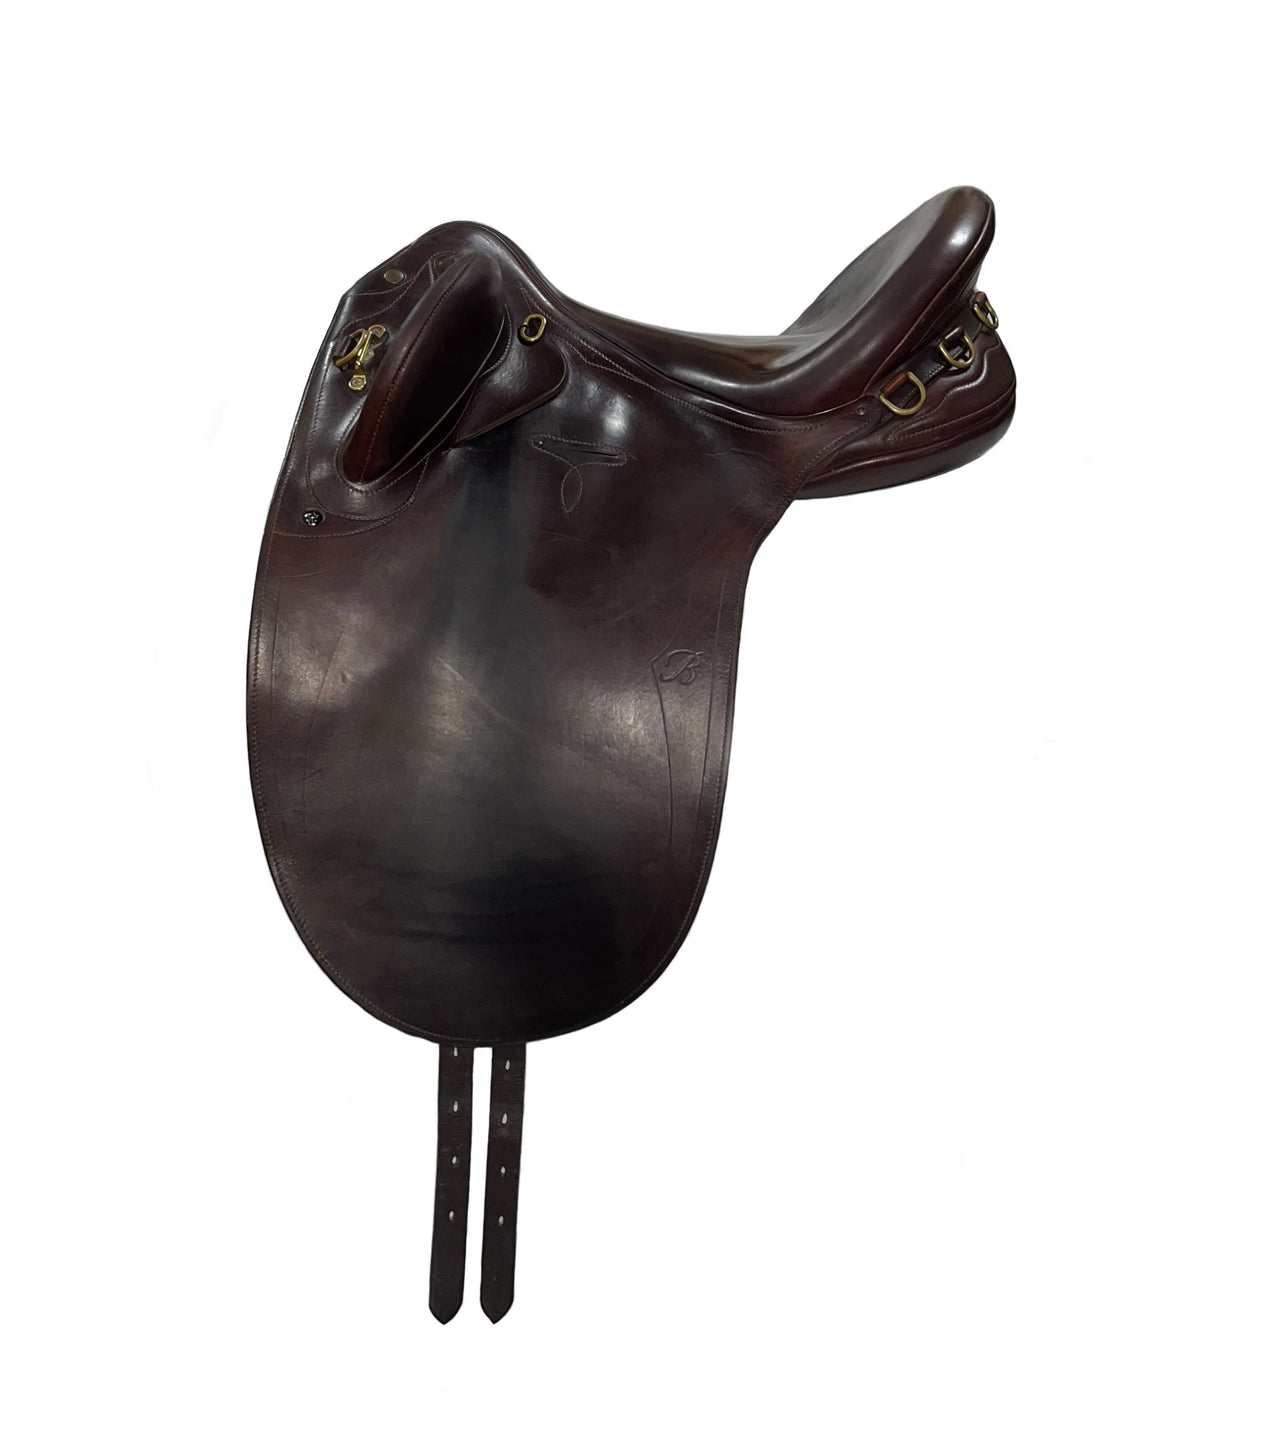 Bates Stock Saddle Second Hand - The Trading Stables